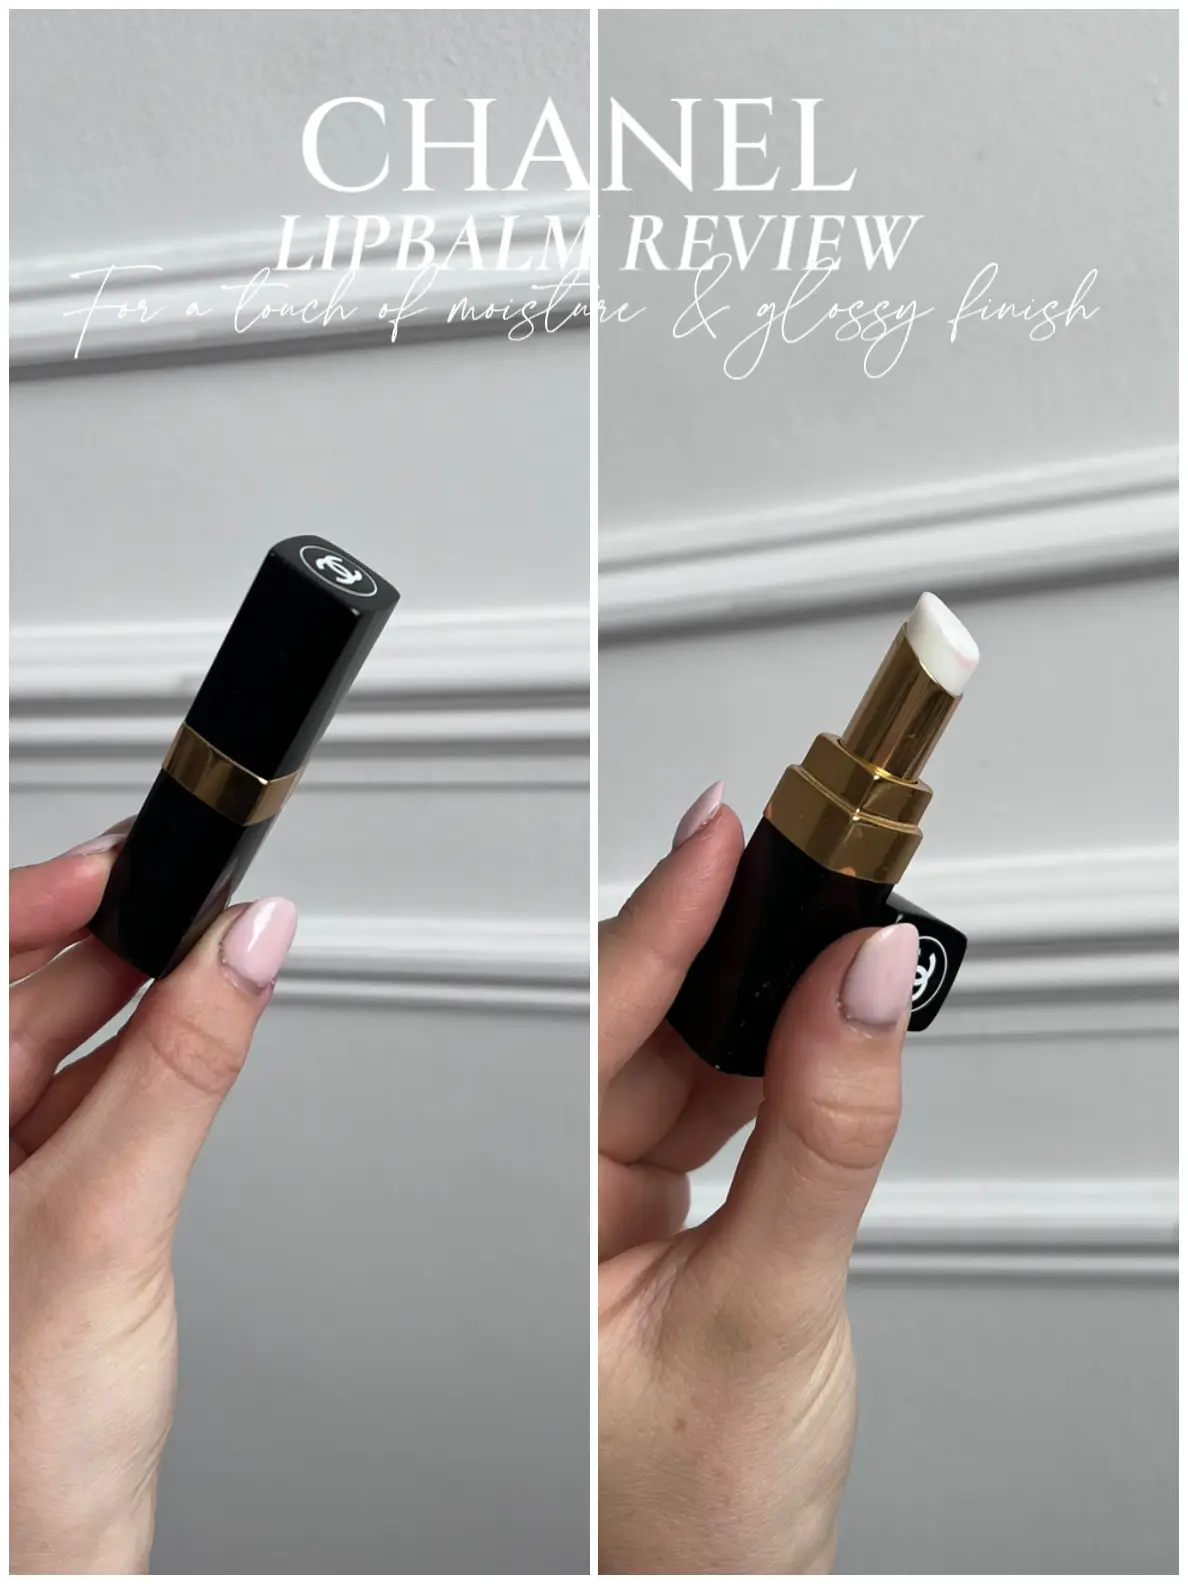 🌸CHANEL LIP-BALM REVIEW, Gallery posted by Mel June Rose